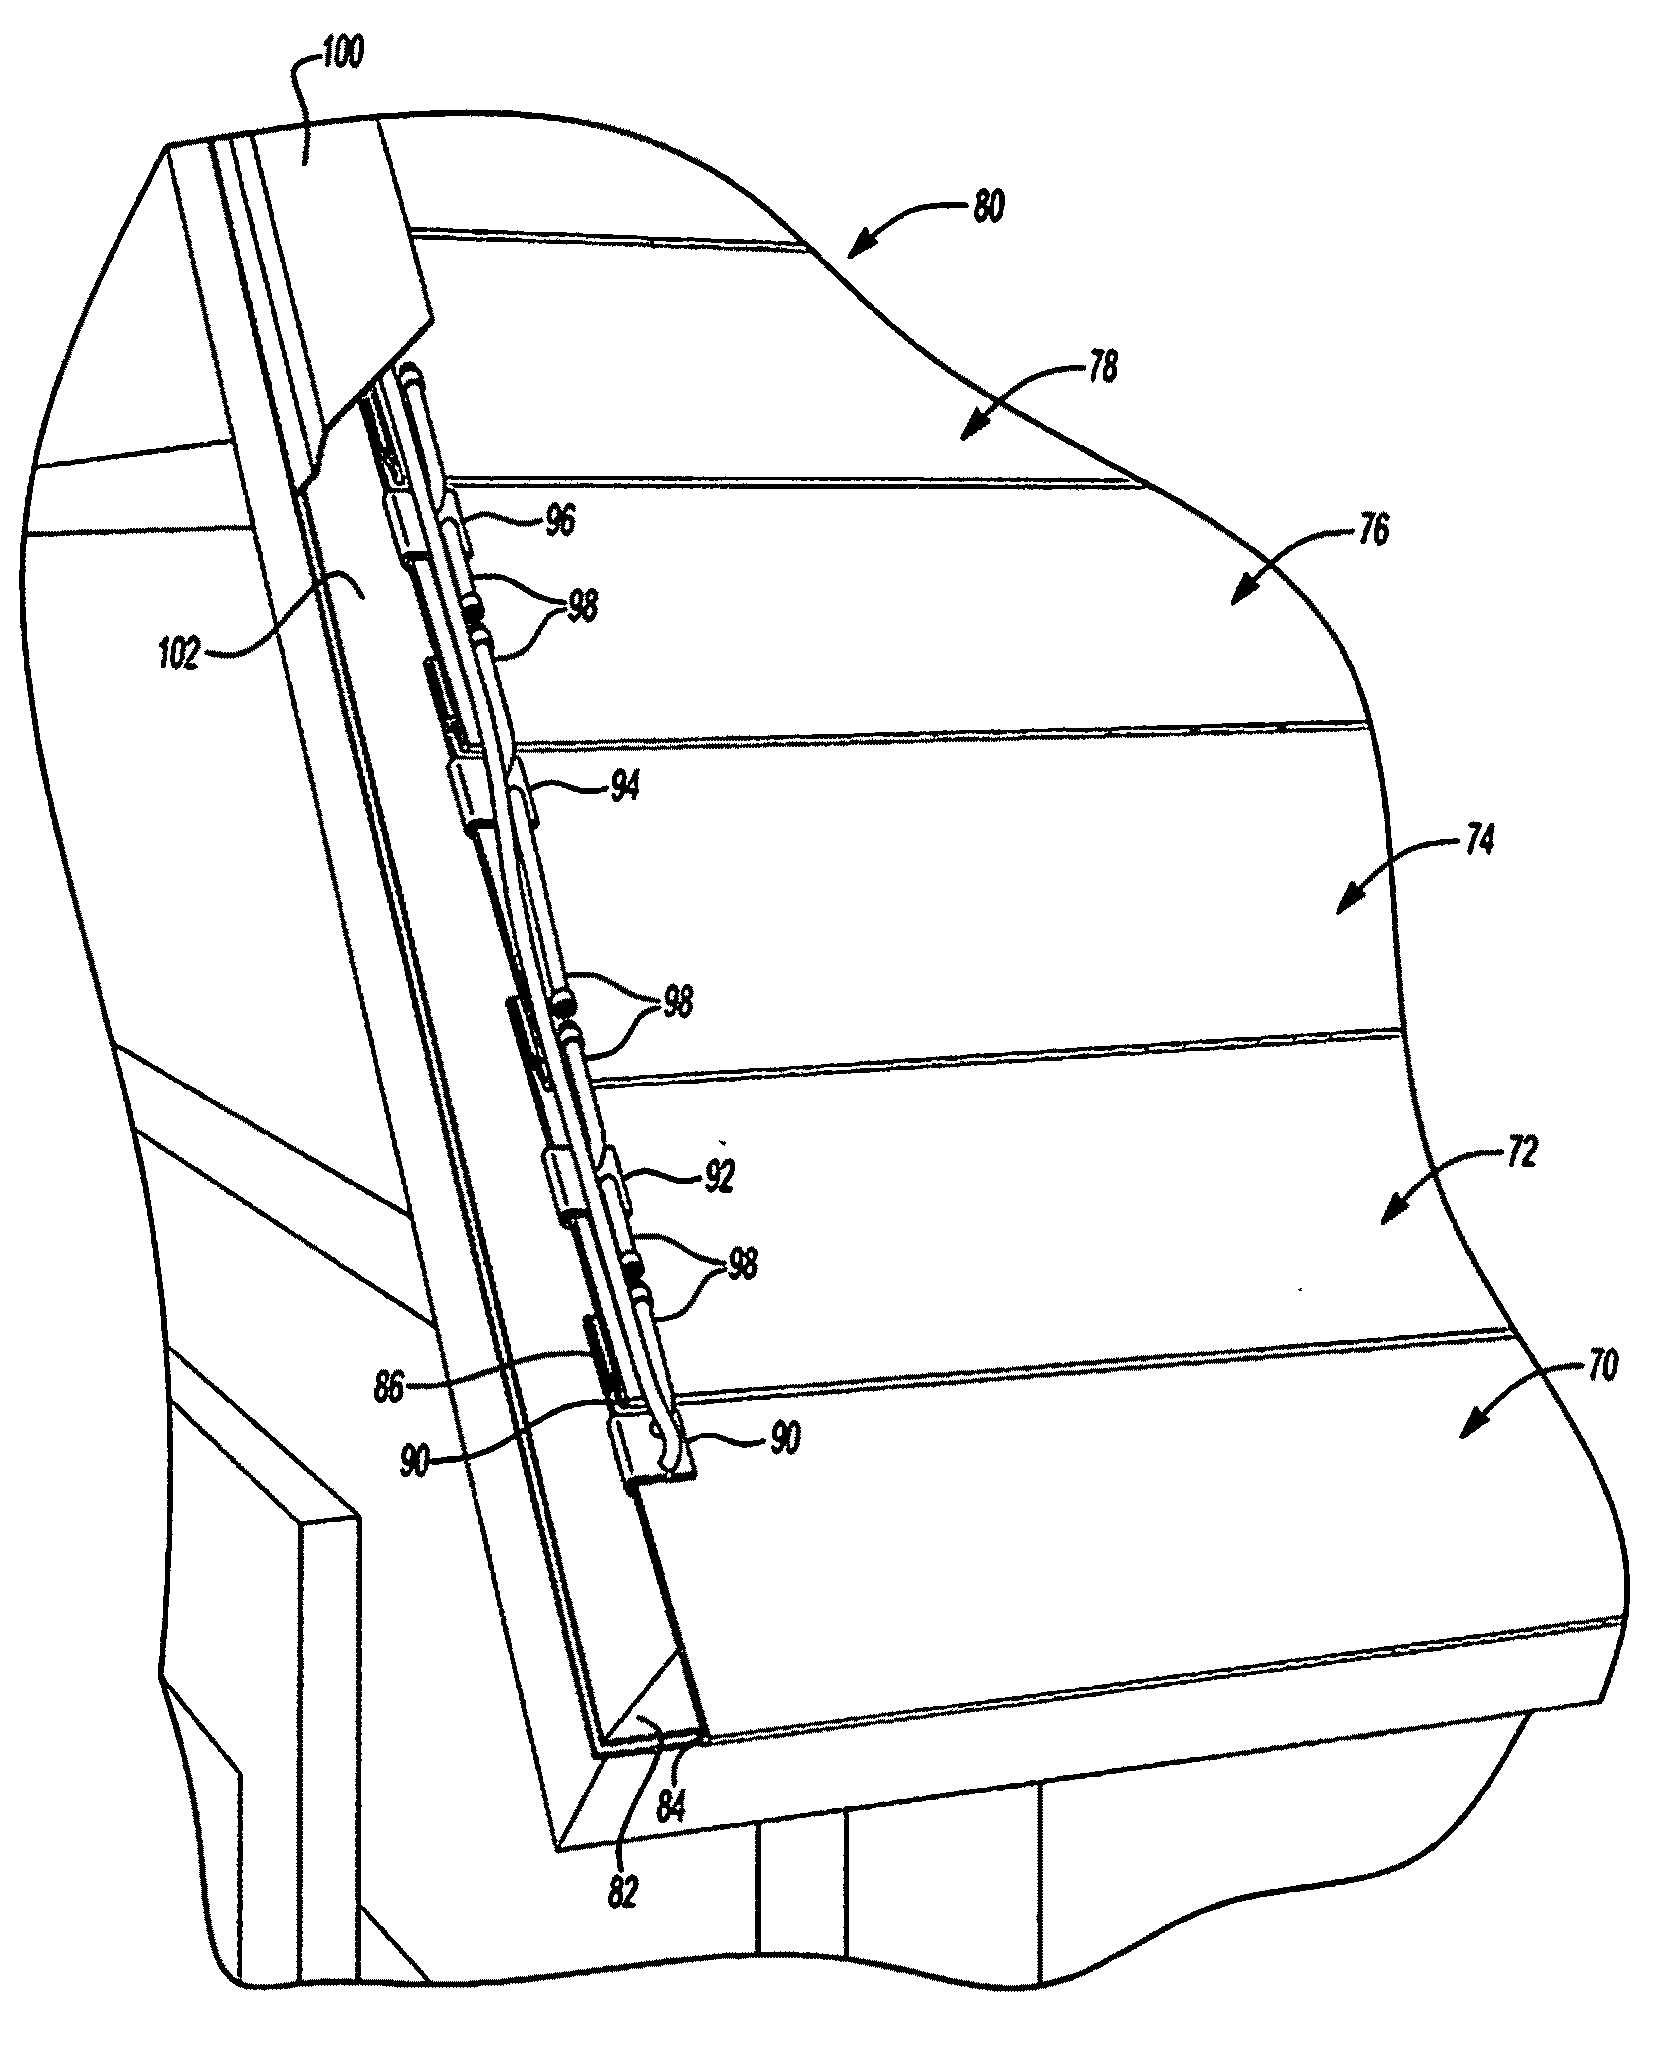 Method and system for providing and installing photovoltaic material